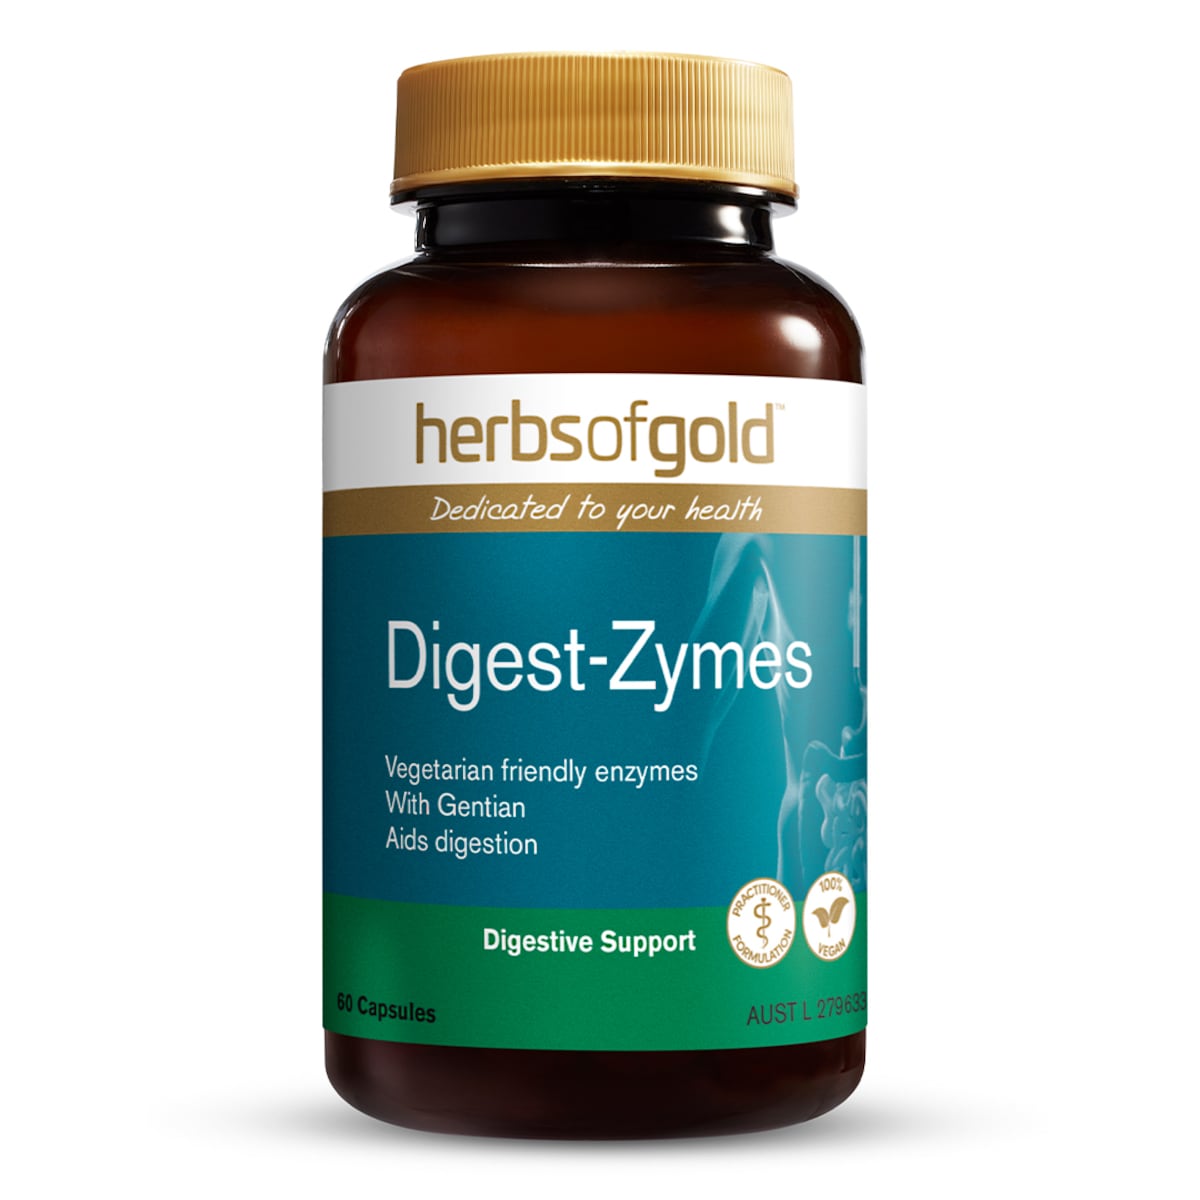 Herbs of Gold Digest-Zymes 60 Capsules